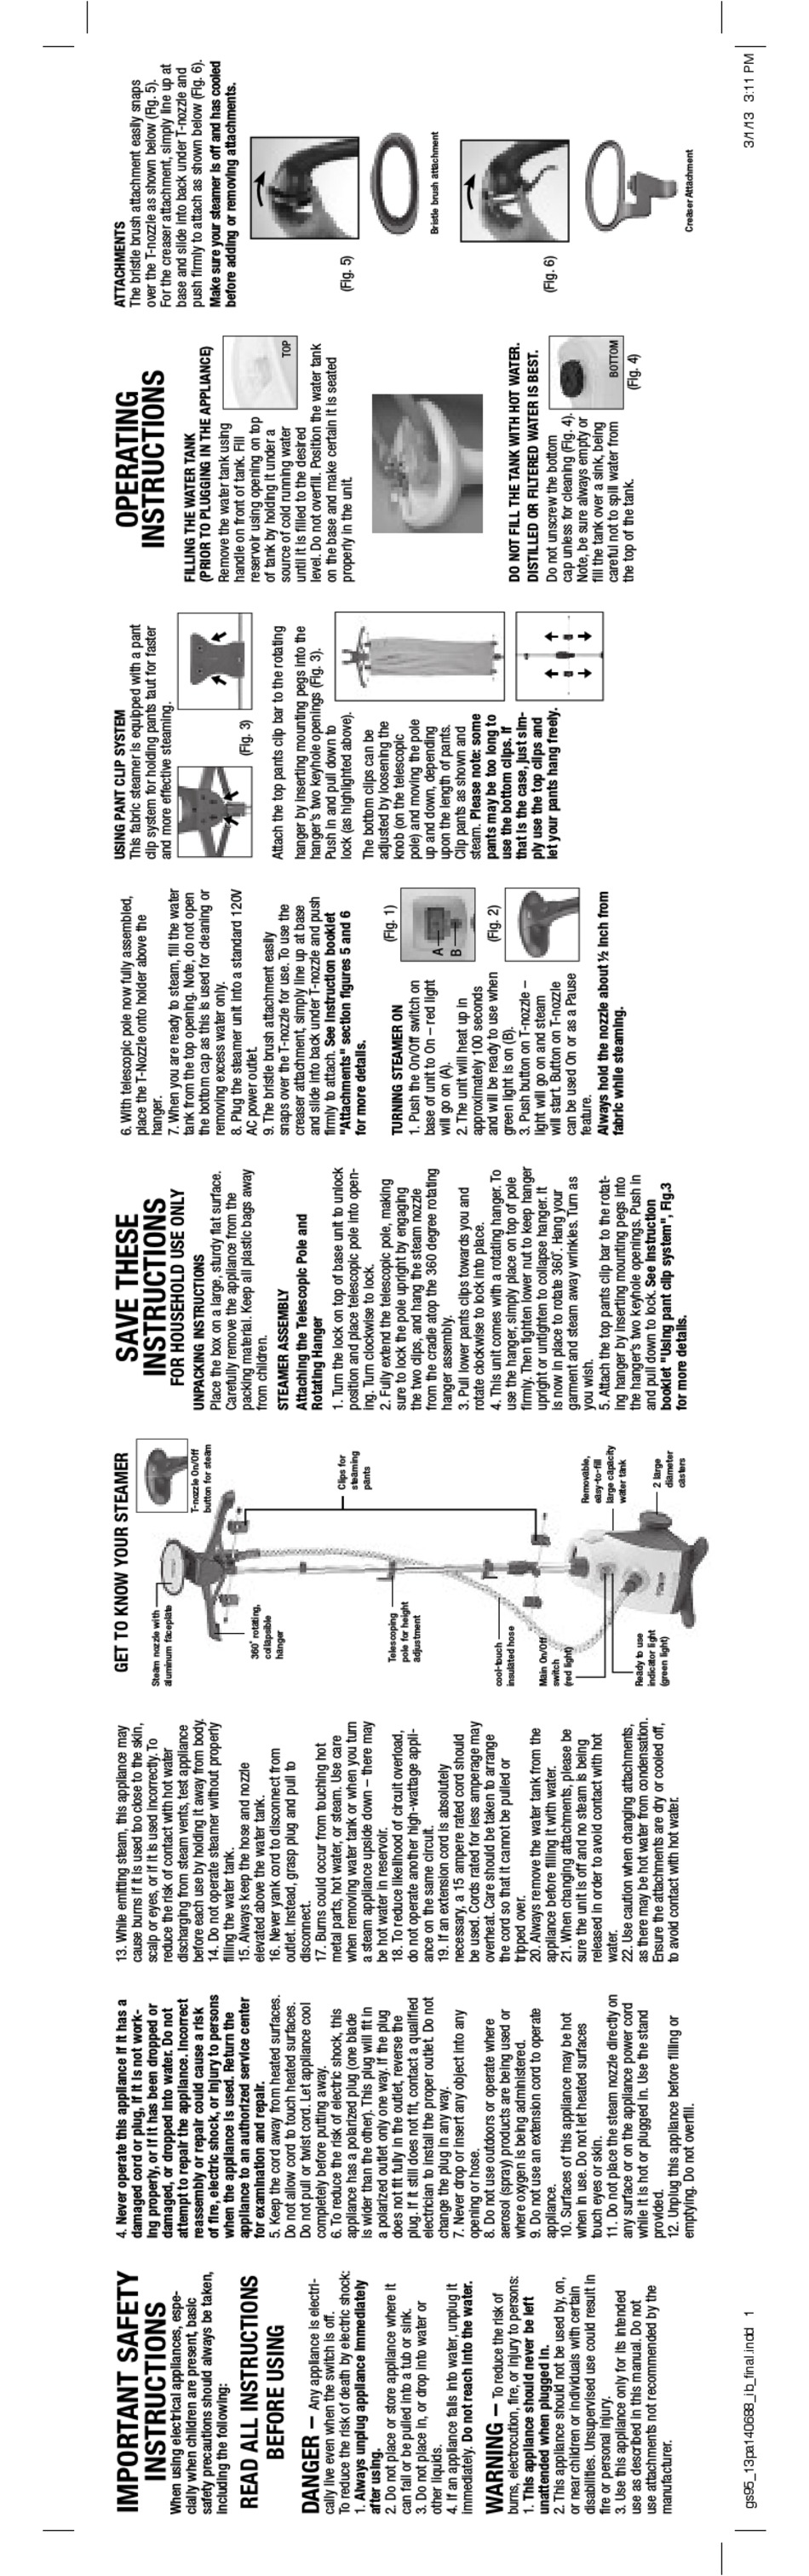 conair expedition walkie talkie instruction manual